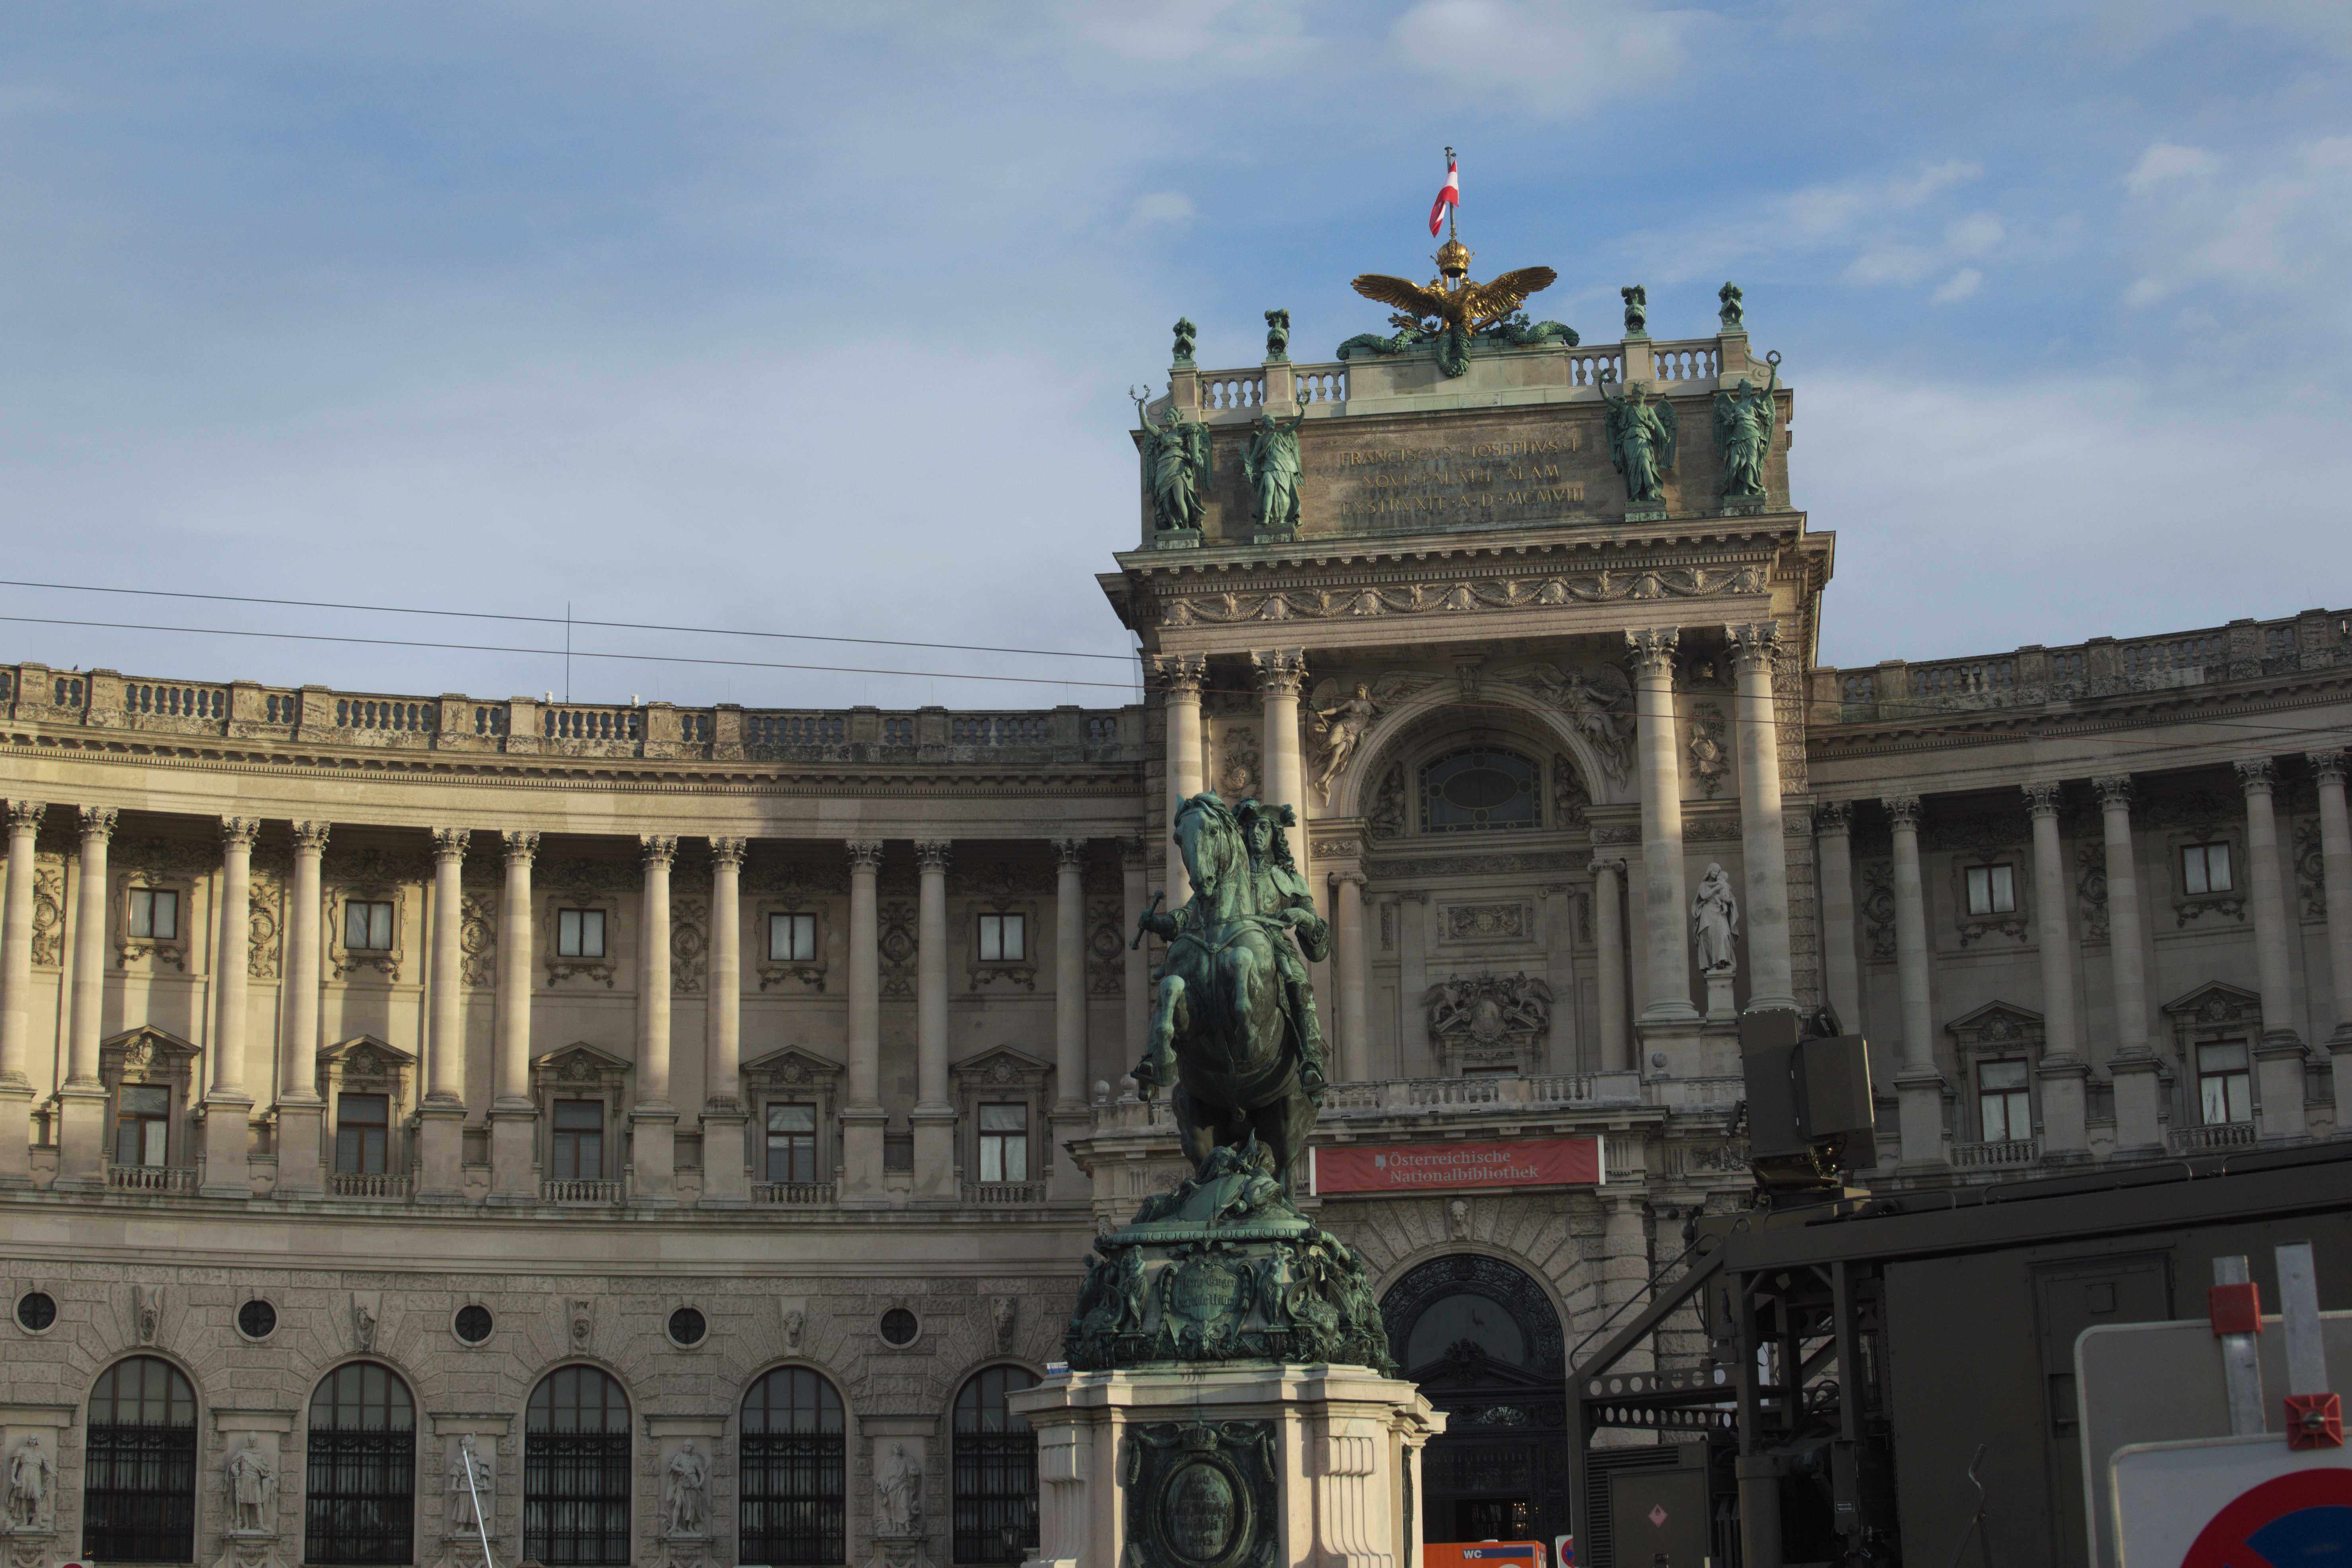 The beautiful buildings of Vienna